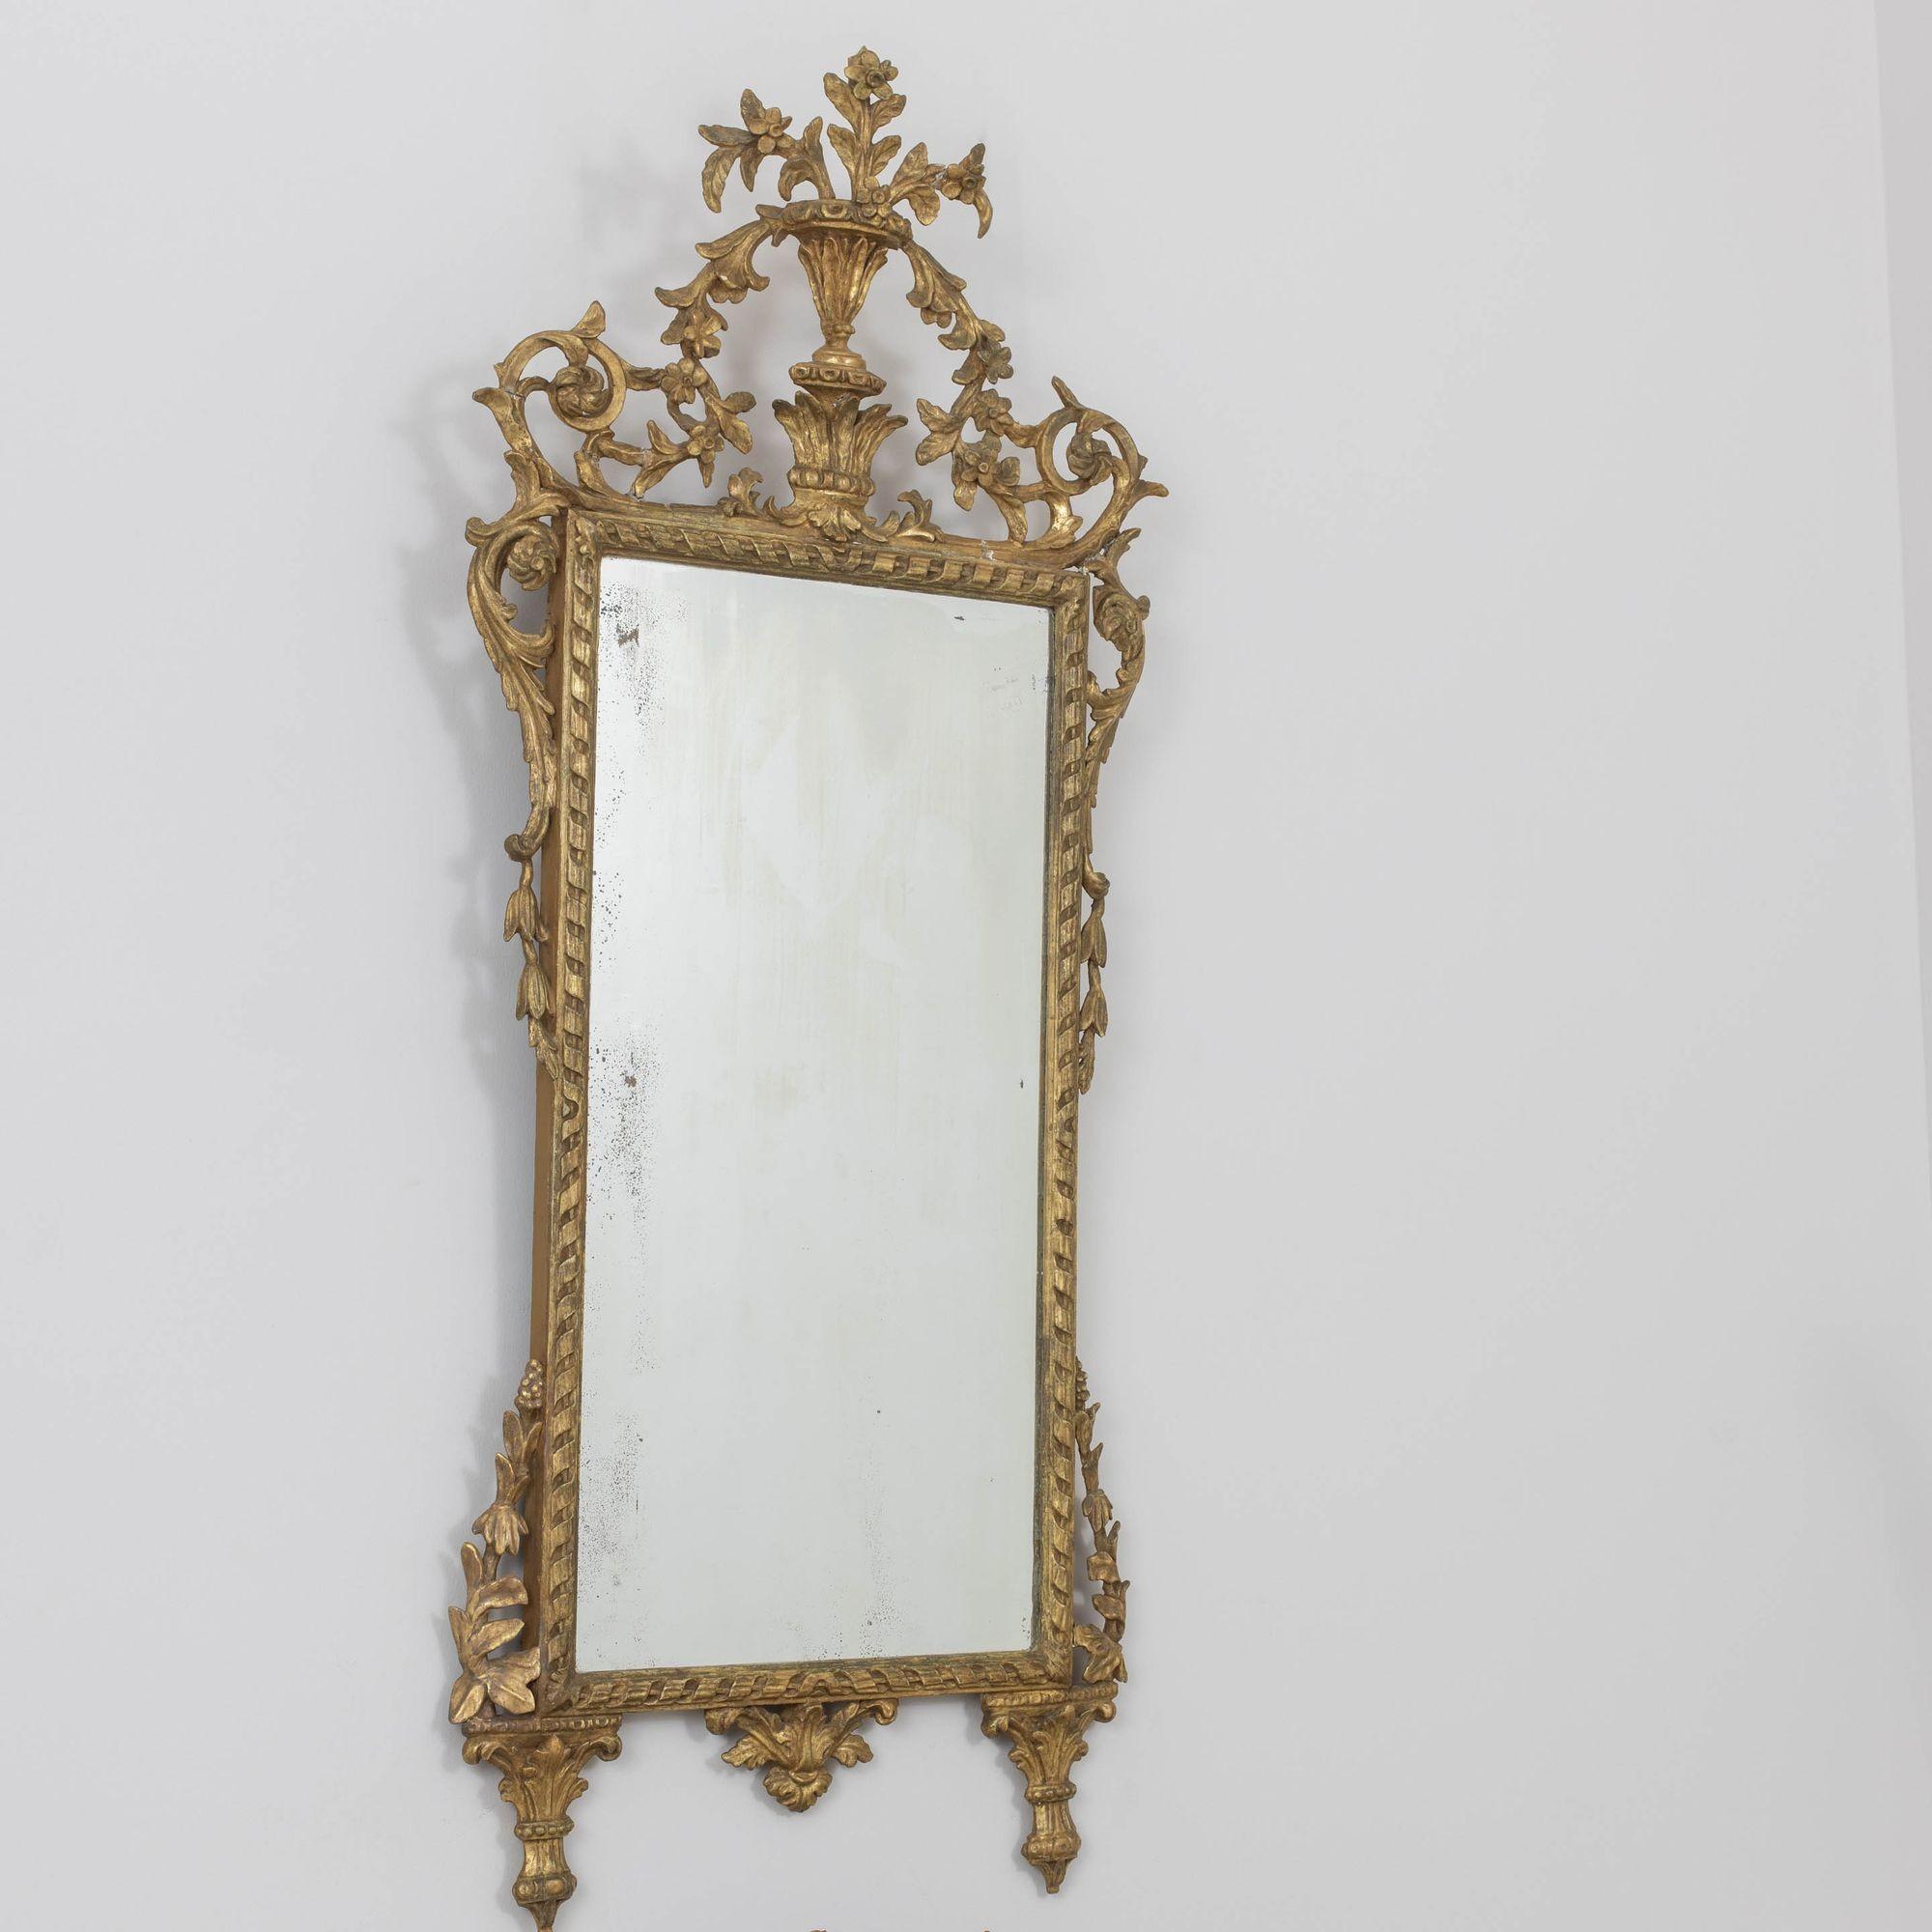 Hand-Crafted 19th c. Italian Giltwood Mirror with Original Mirror Plate For Sale